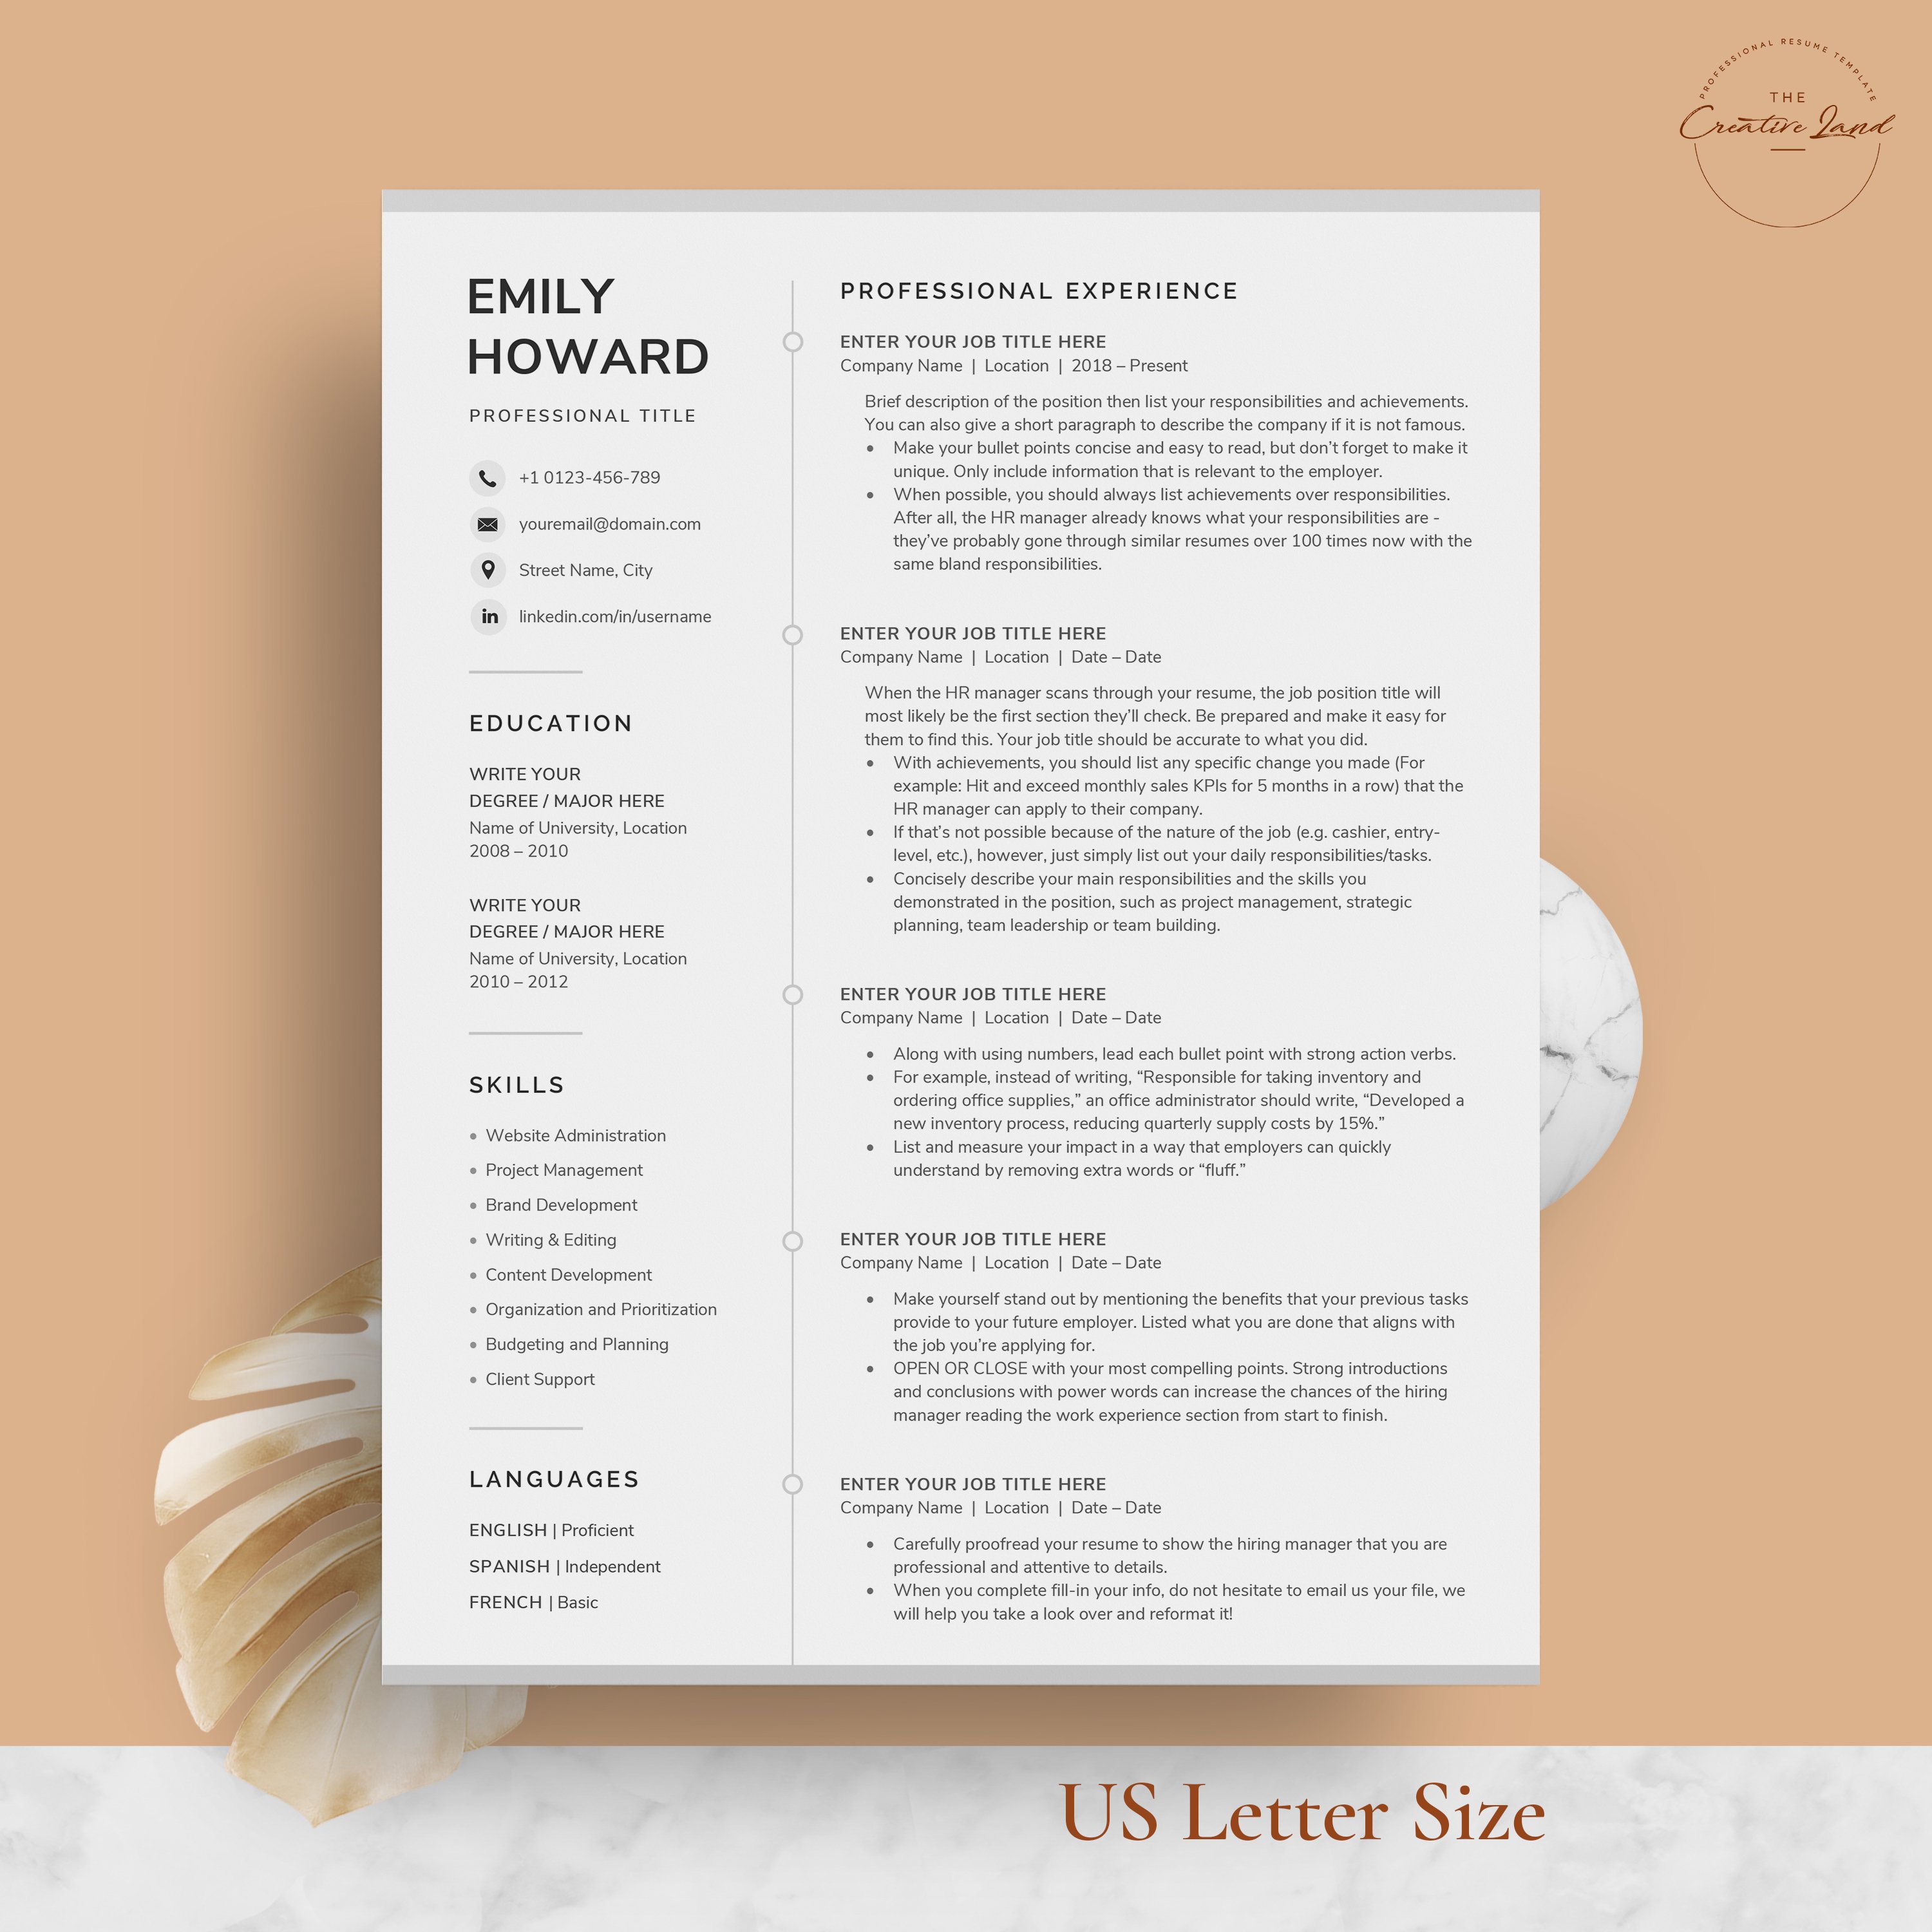 Resume/CV - The Howard preview image.